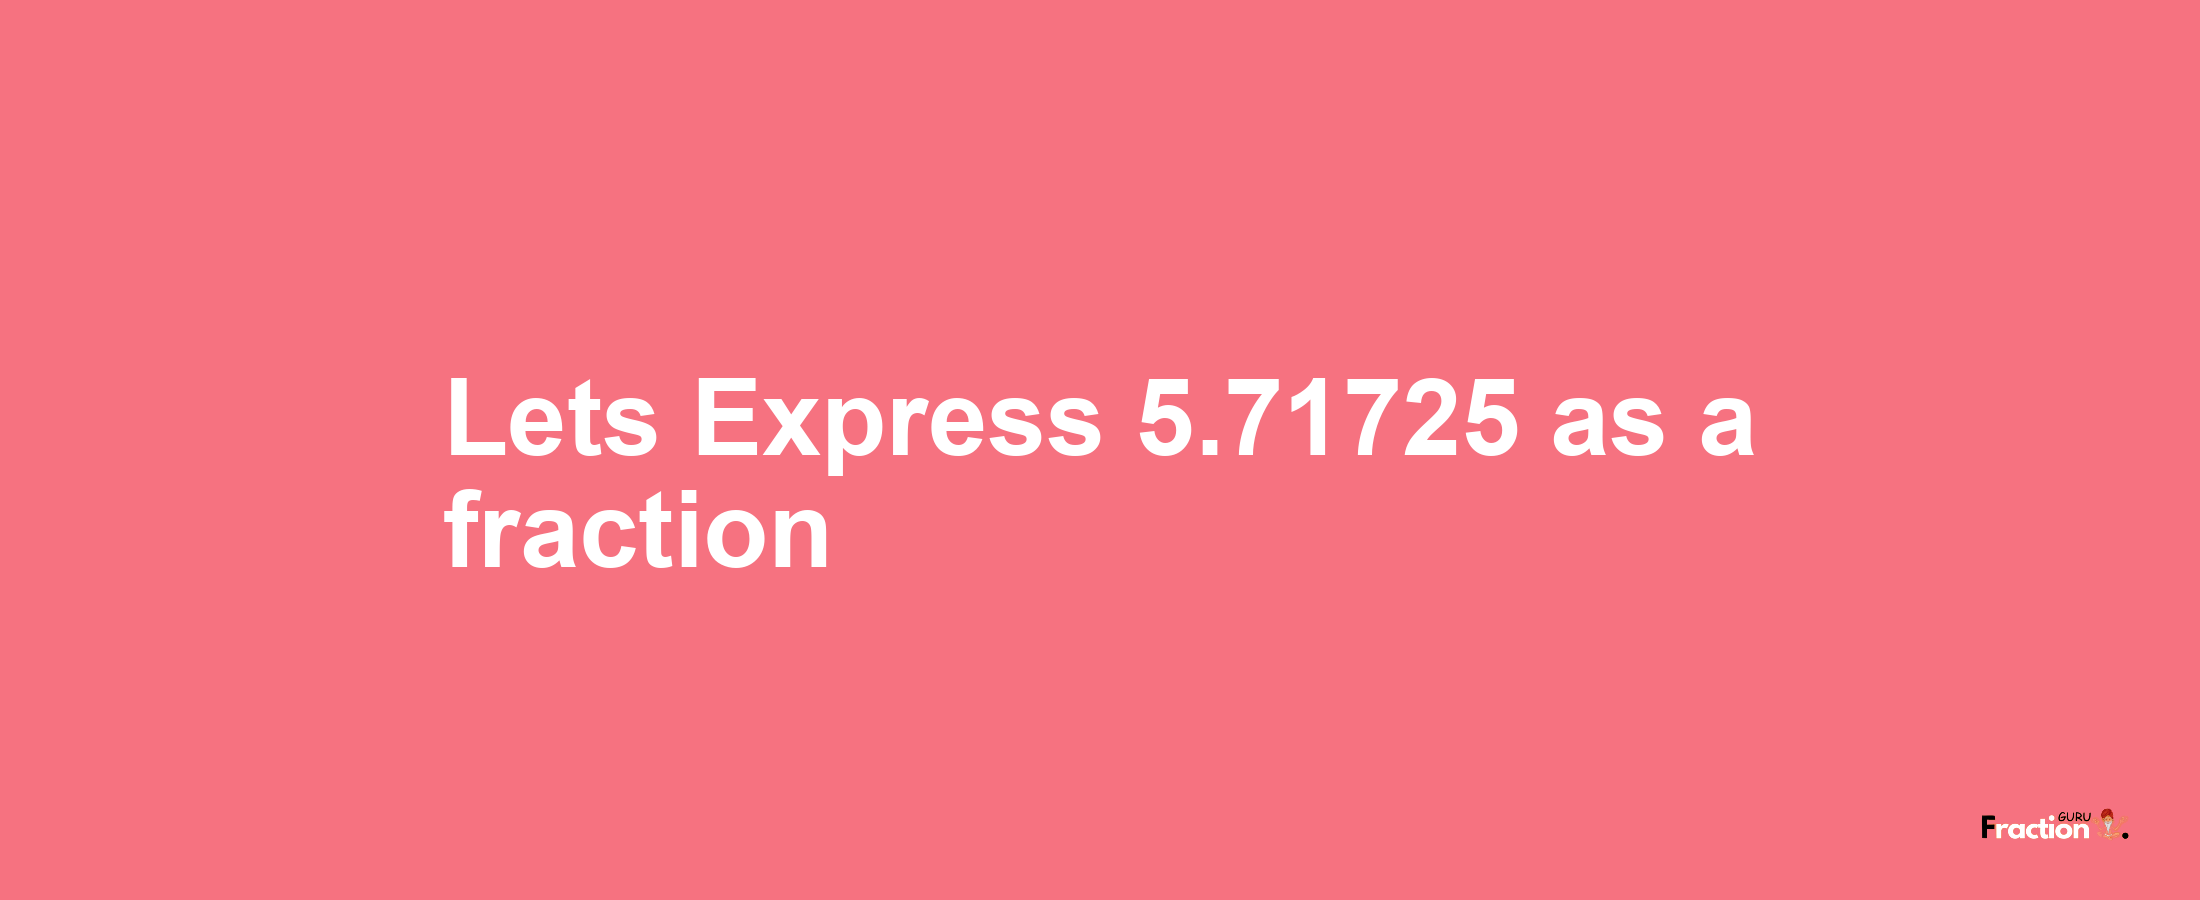 Lets Express 5.71725 as afraction